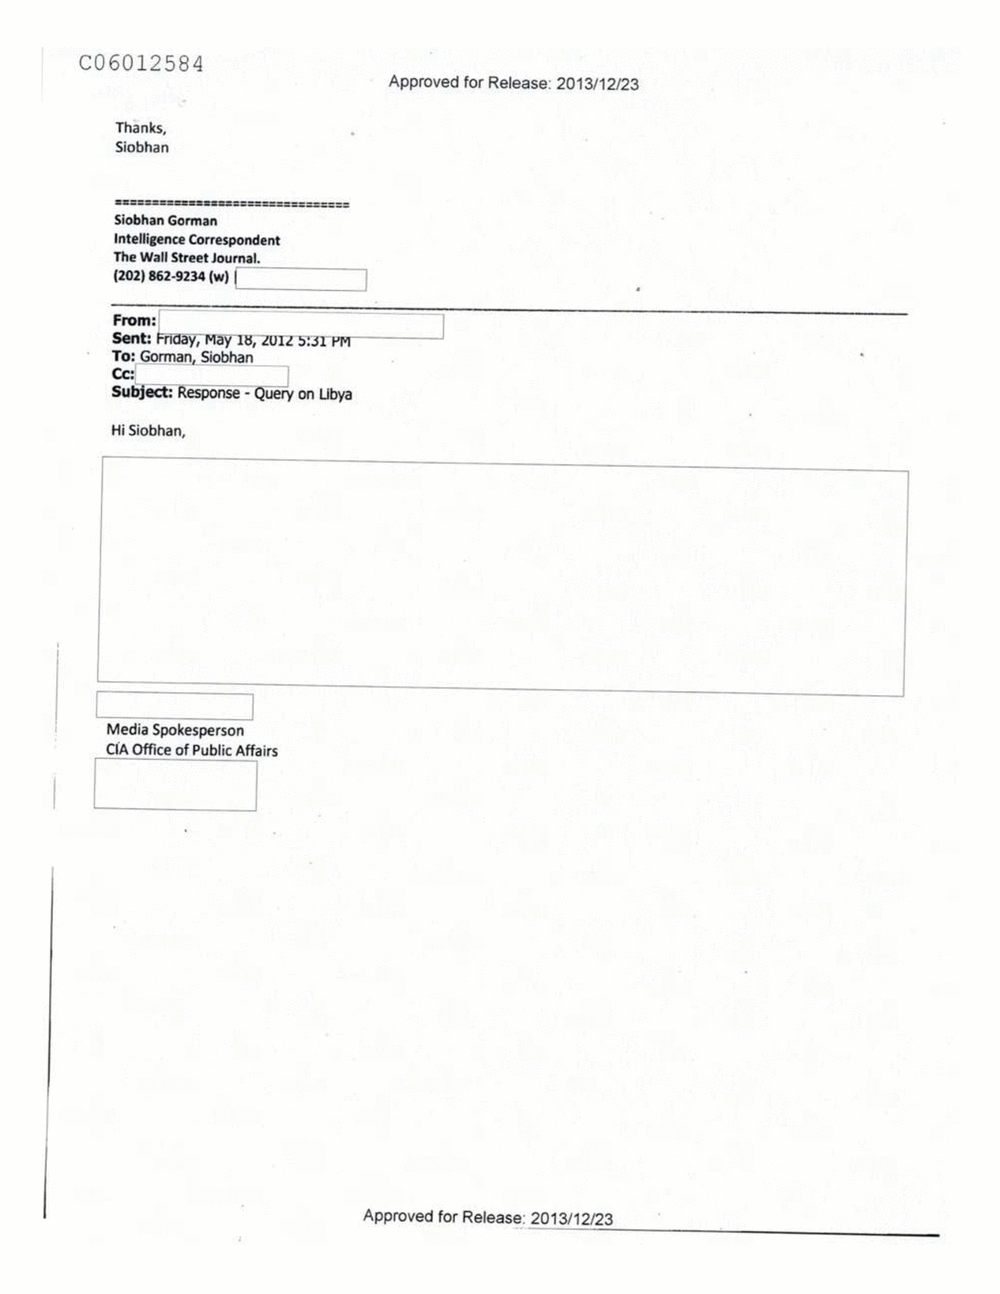 Page 128 from Email Correspondence Between Reporters and CIA Flacks